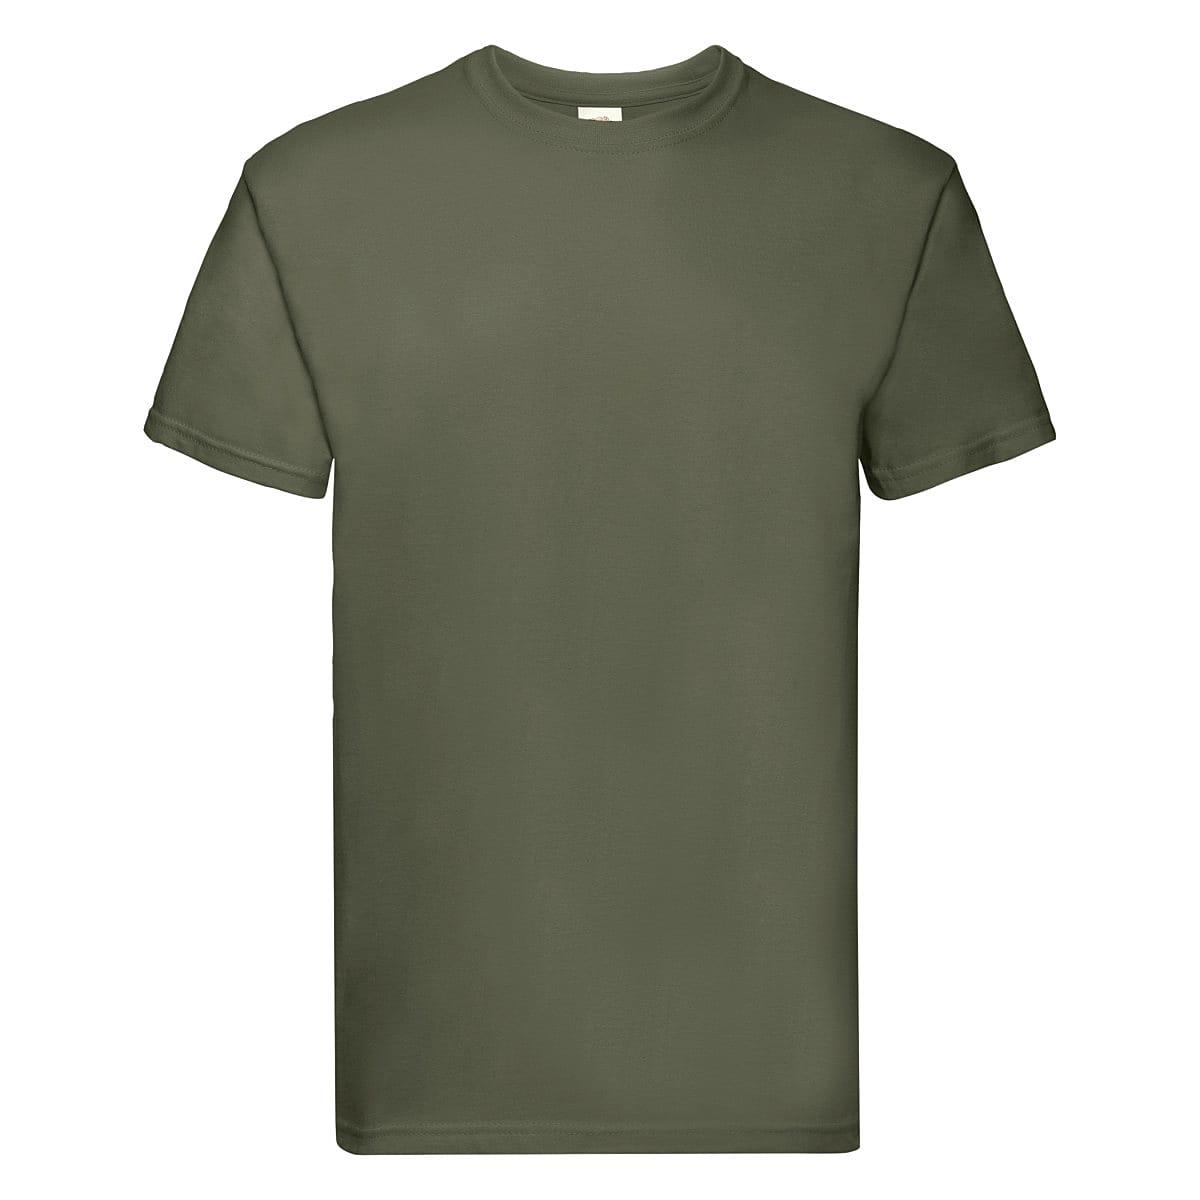 Fruit Of The Loom Super Premium T-Shirt in Classic Olive (Product Code: 61044)